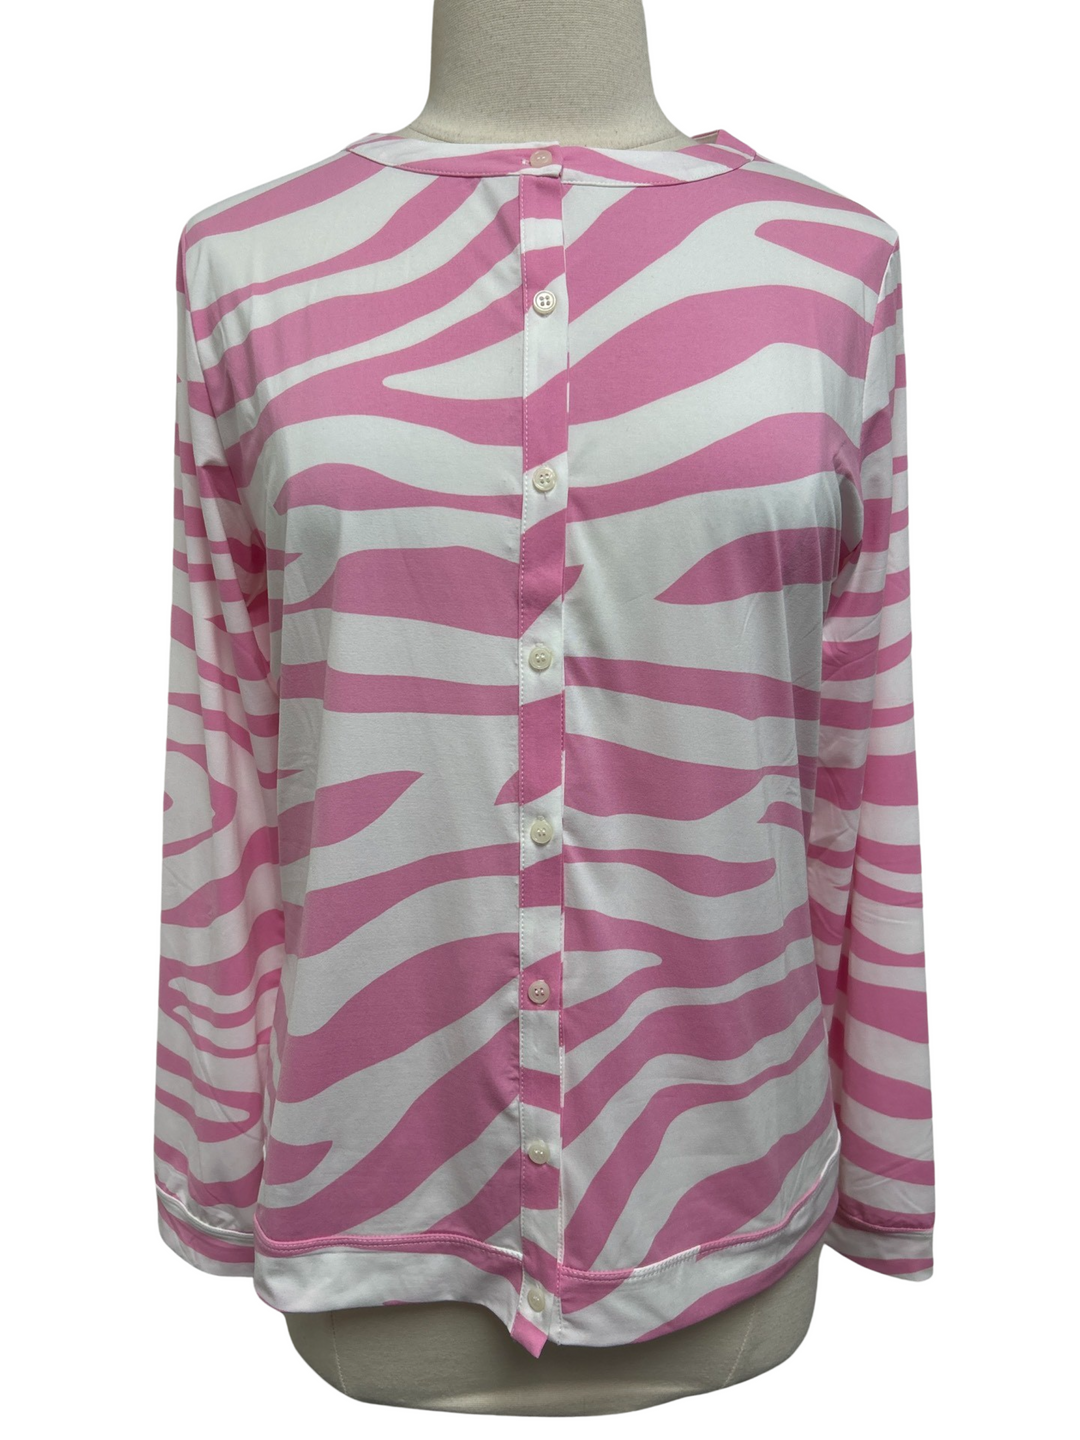 OTG - Long Sleeve Top - Pink and White - L - Skorzie